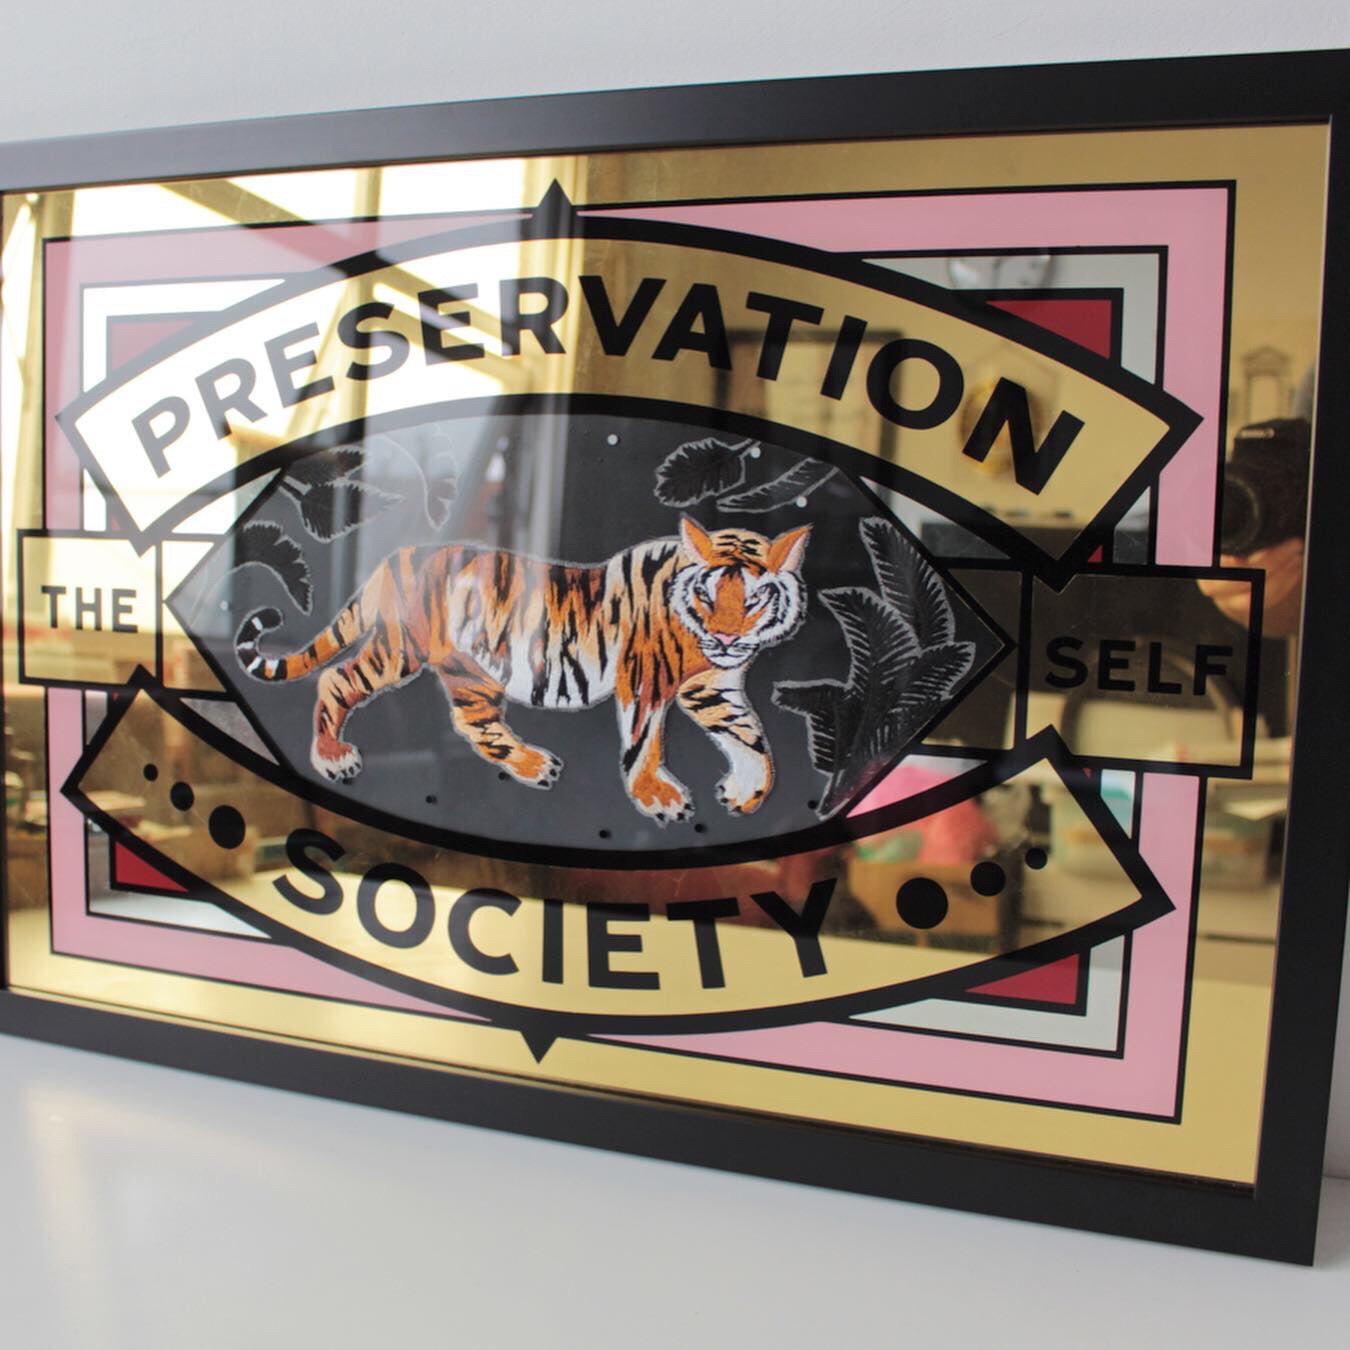 Embroidered prowling tiger and gold leaf artwork shown in black frame on white background